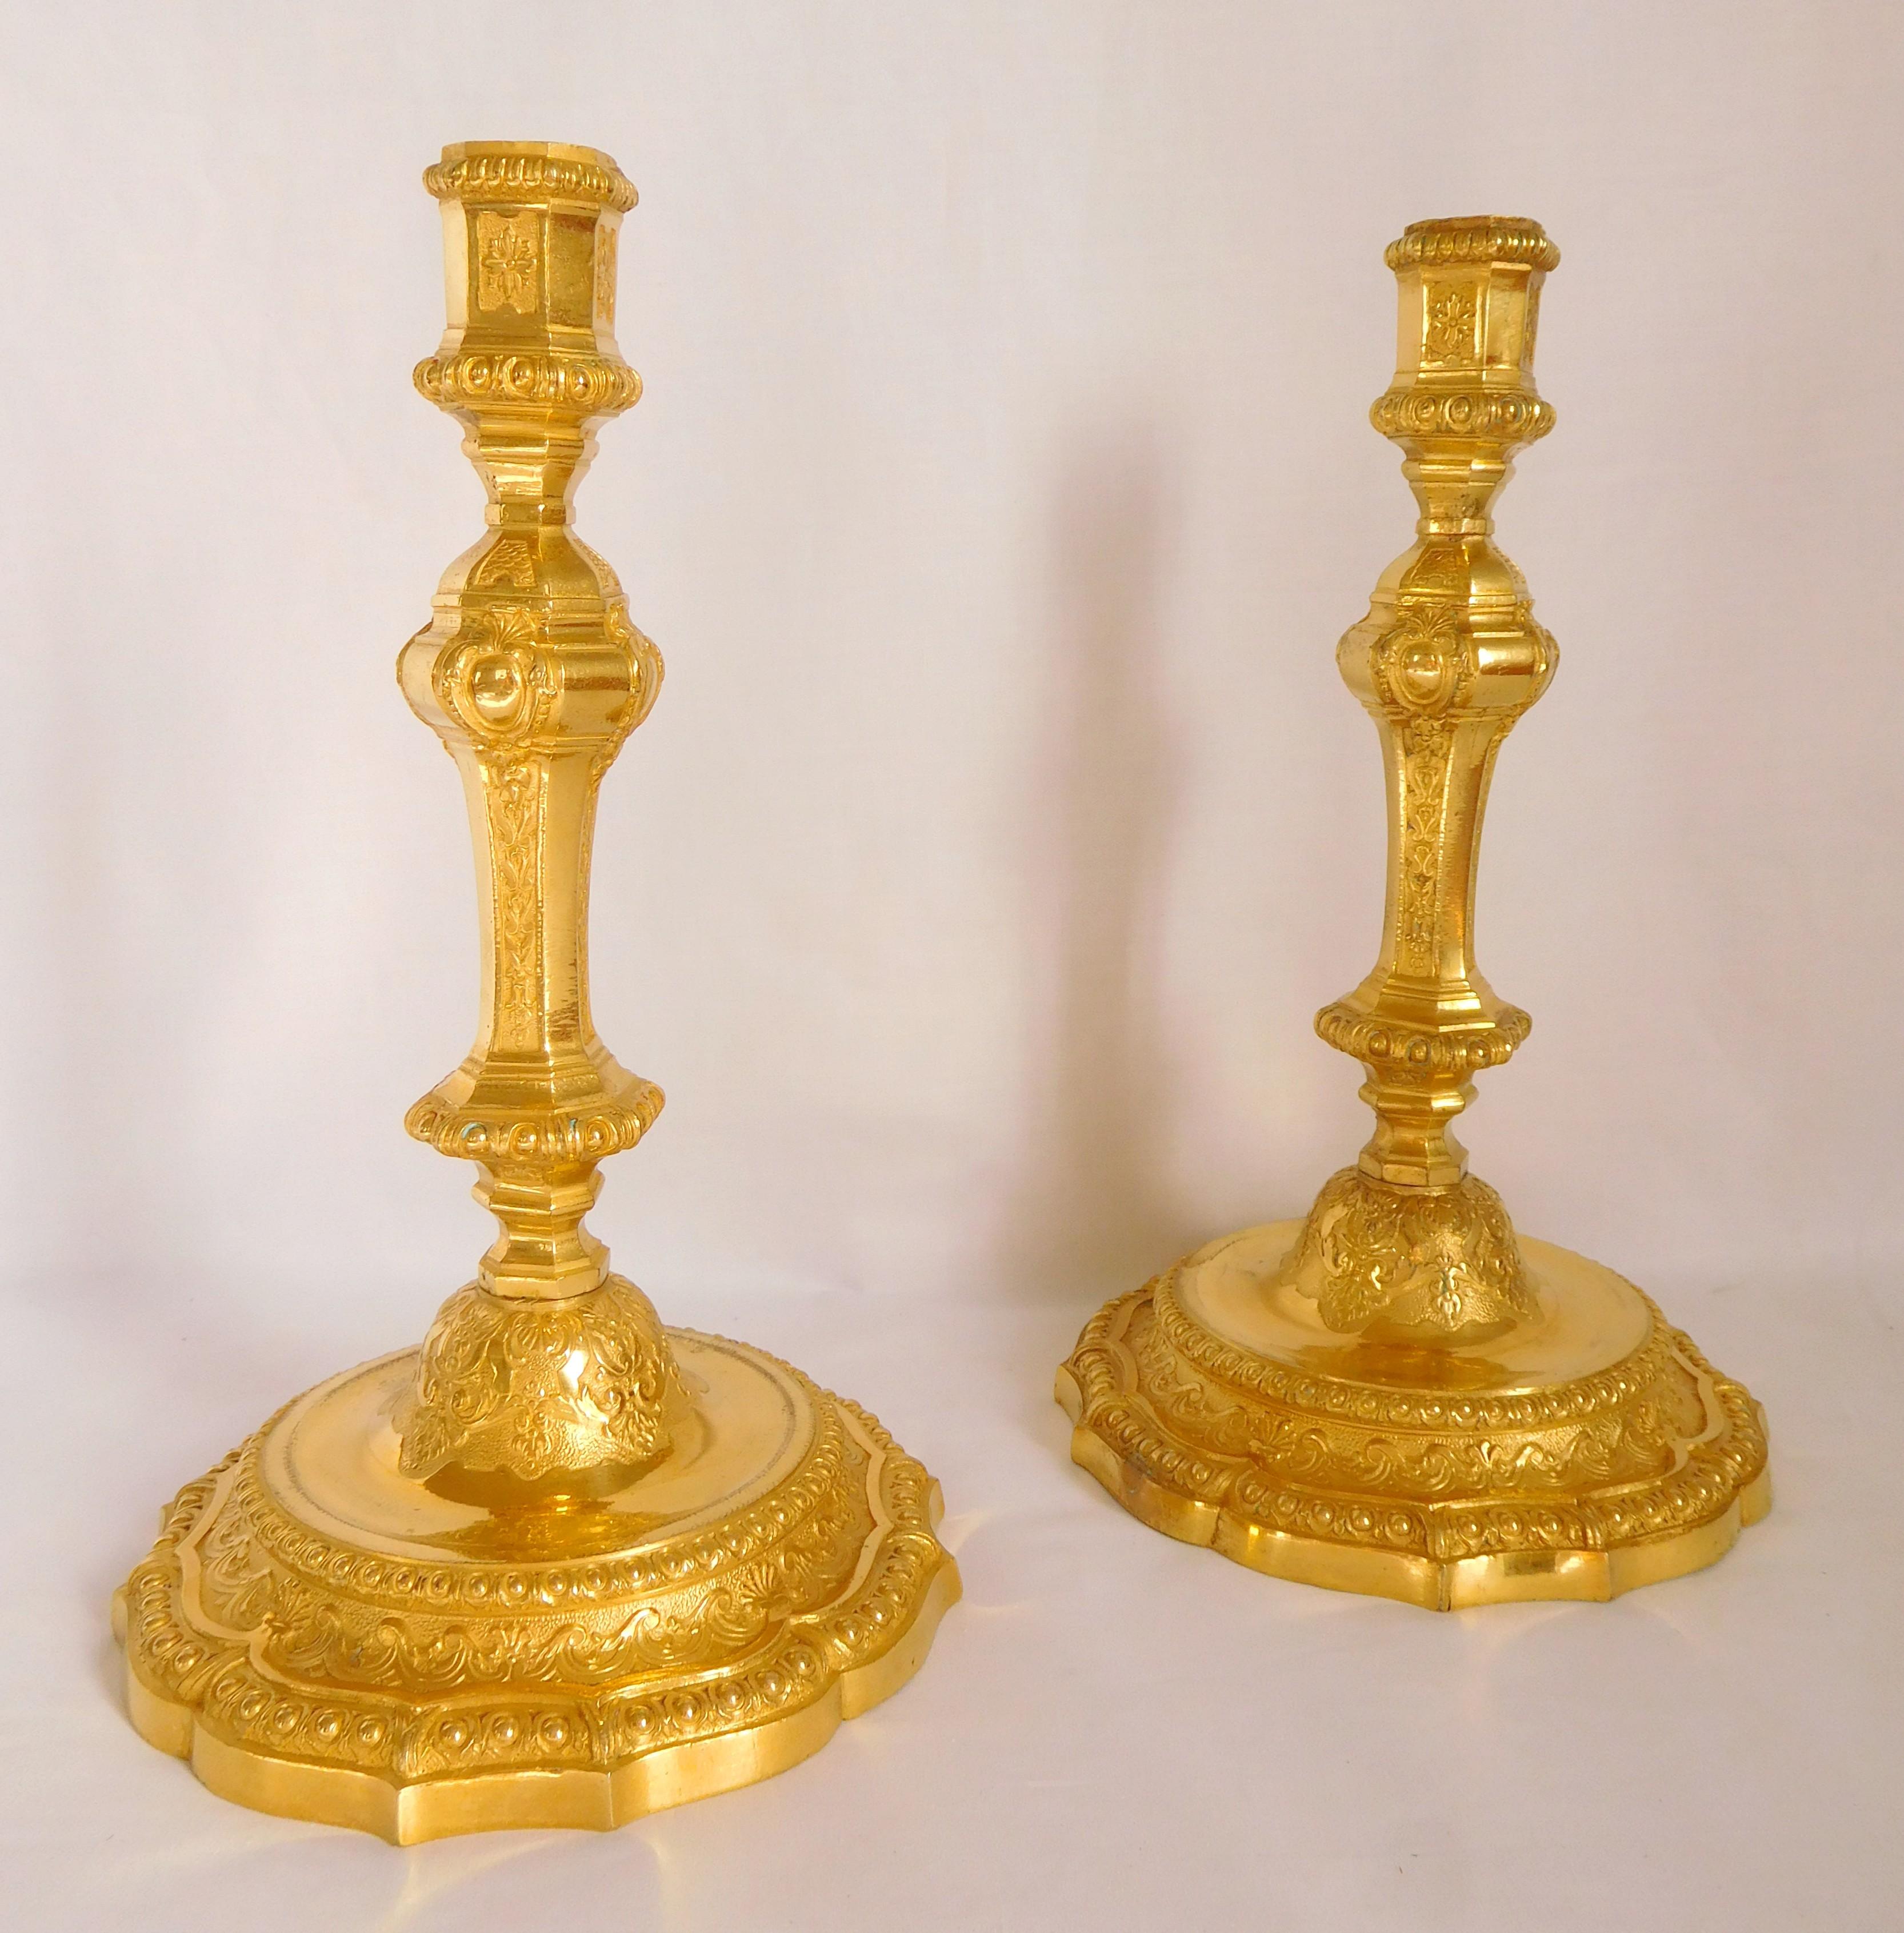 Antique French pair of candlesticks, beautiful ormolu (gilt bronze) set, finely chiseled Louis XIV style or Regency style pattern (early 18th century style). Our model is richly ornamented with pearls, gadroons, curls, acanthus, shells and